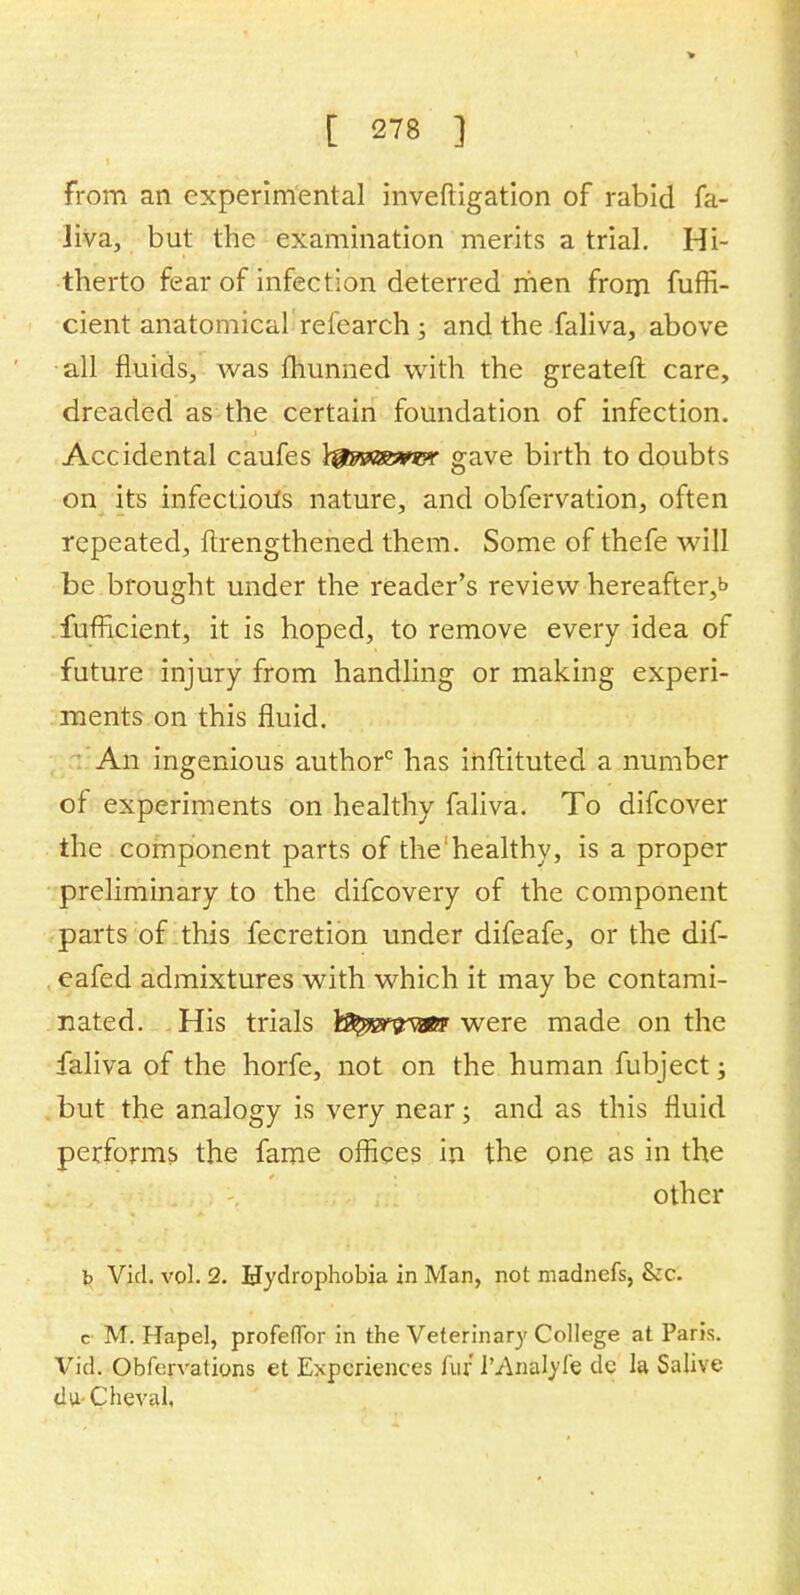 from an experimental inveftigation of rabid fa- liva, but the examination merits a trial. Hi- therto fear of infection deterred men from fuffi- cient anatomical refearch ; and the faliva, above all fluids, was fhunned with the greateft care, dreaded as the certain foundation of infection. Accidental caufes \^msm?r gave birth to doubts on its infections nature, and obfervation, often repeated, ftrengthened them. Some of thefe will be brought under the reader's review hereafter^ fufHcient, it is hoped, to remove every idea of future injury from handling or making experi- ments on this fluid. An ingenious author0 has inftituted a number of experiments on healthy faliva. To difcover the component parts of the'healthy, is a proper preliminary to the difcovery of the component parts of this fecretion under difeafe, or the dif- eafed admixtures with which it may be contami- nated. His trials \&p&wm were made on the faliva of the horfe, not on the human fubject; but the analogy is very near; and as this fluid performs the fame offices in the one as in the other b Vid. vol. 2. Hydrophobia in Man, not madnefs, &c. c M. Hapel, profeflbr in the Veterinary College at Paris. Vid. Obfervations et Experiences fur I'An&Iyfe dc la Salive du Cheval,